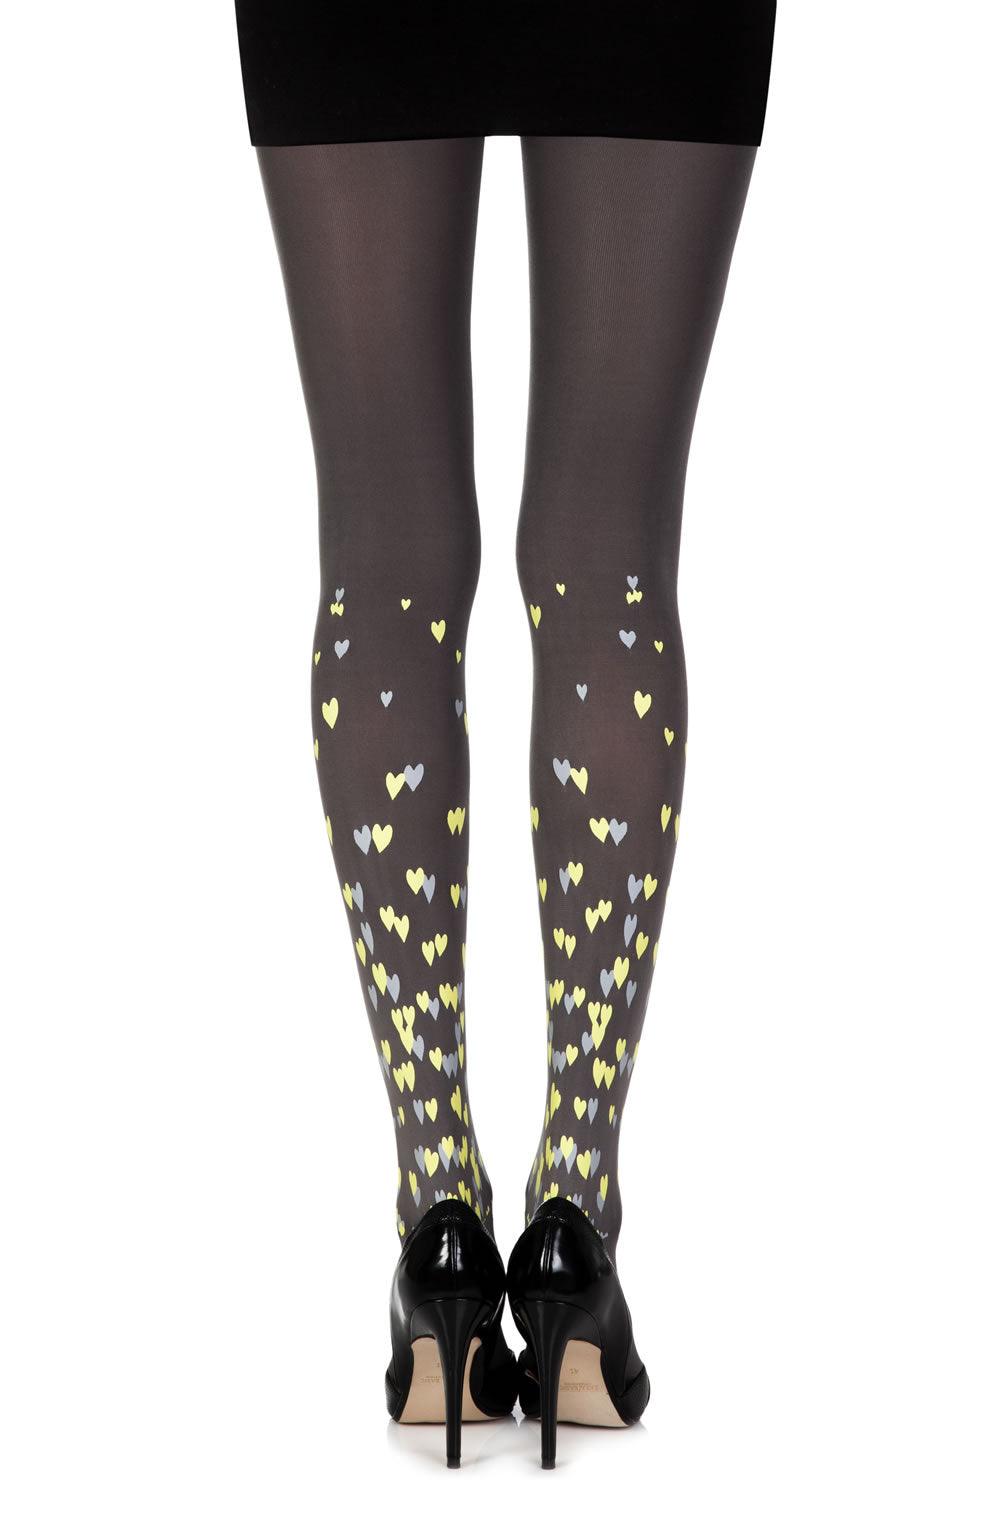 Zohara "Queen Of Hearts" Grey Print Tights - Sydney Rose Lingerie 